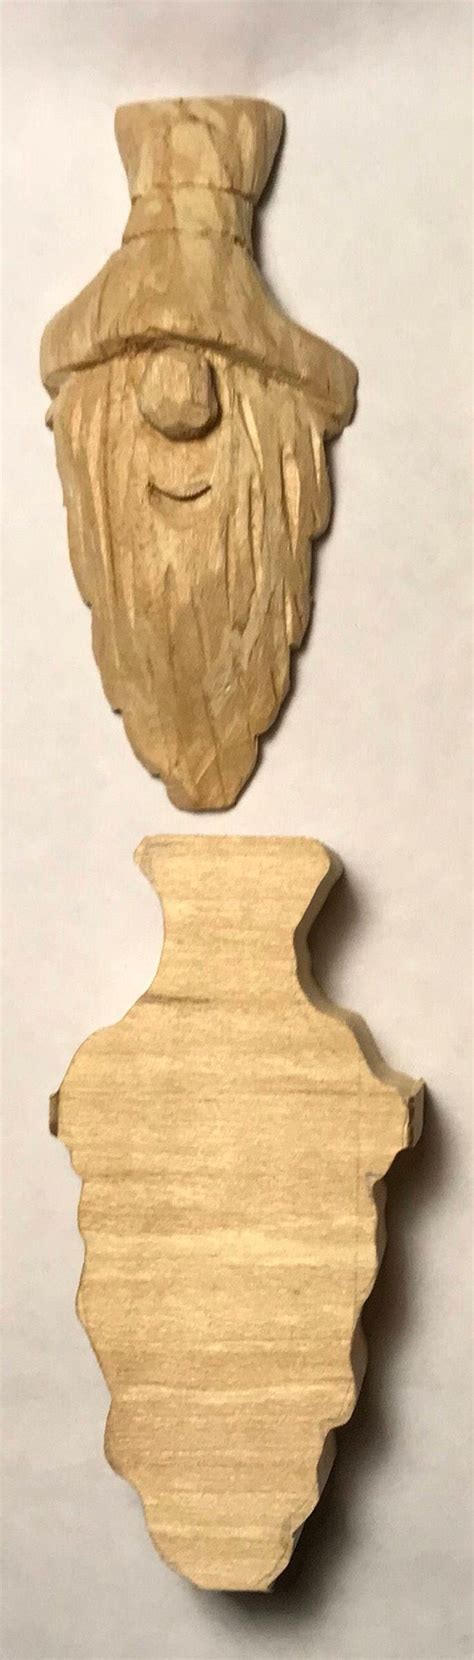 Pin On Carving Wood